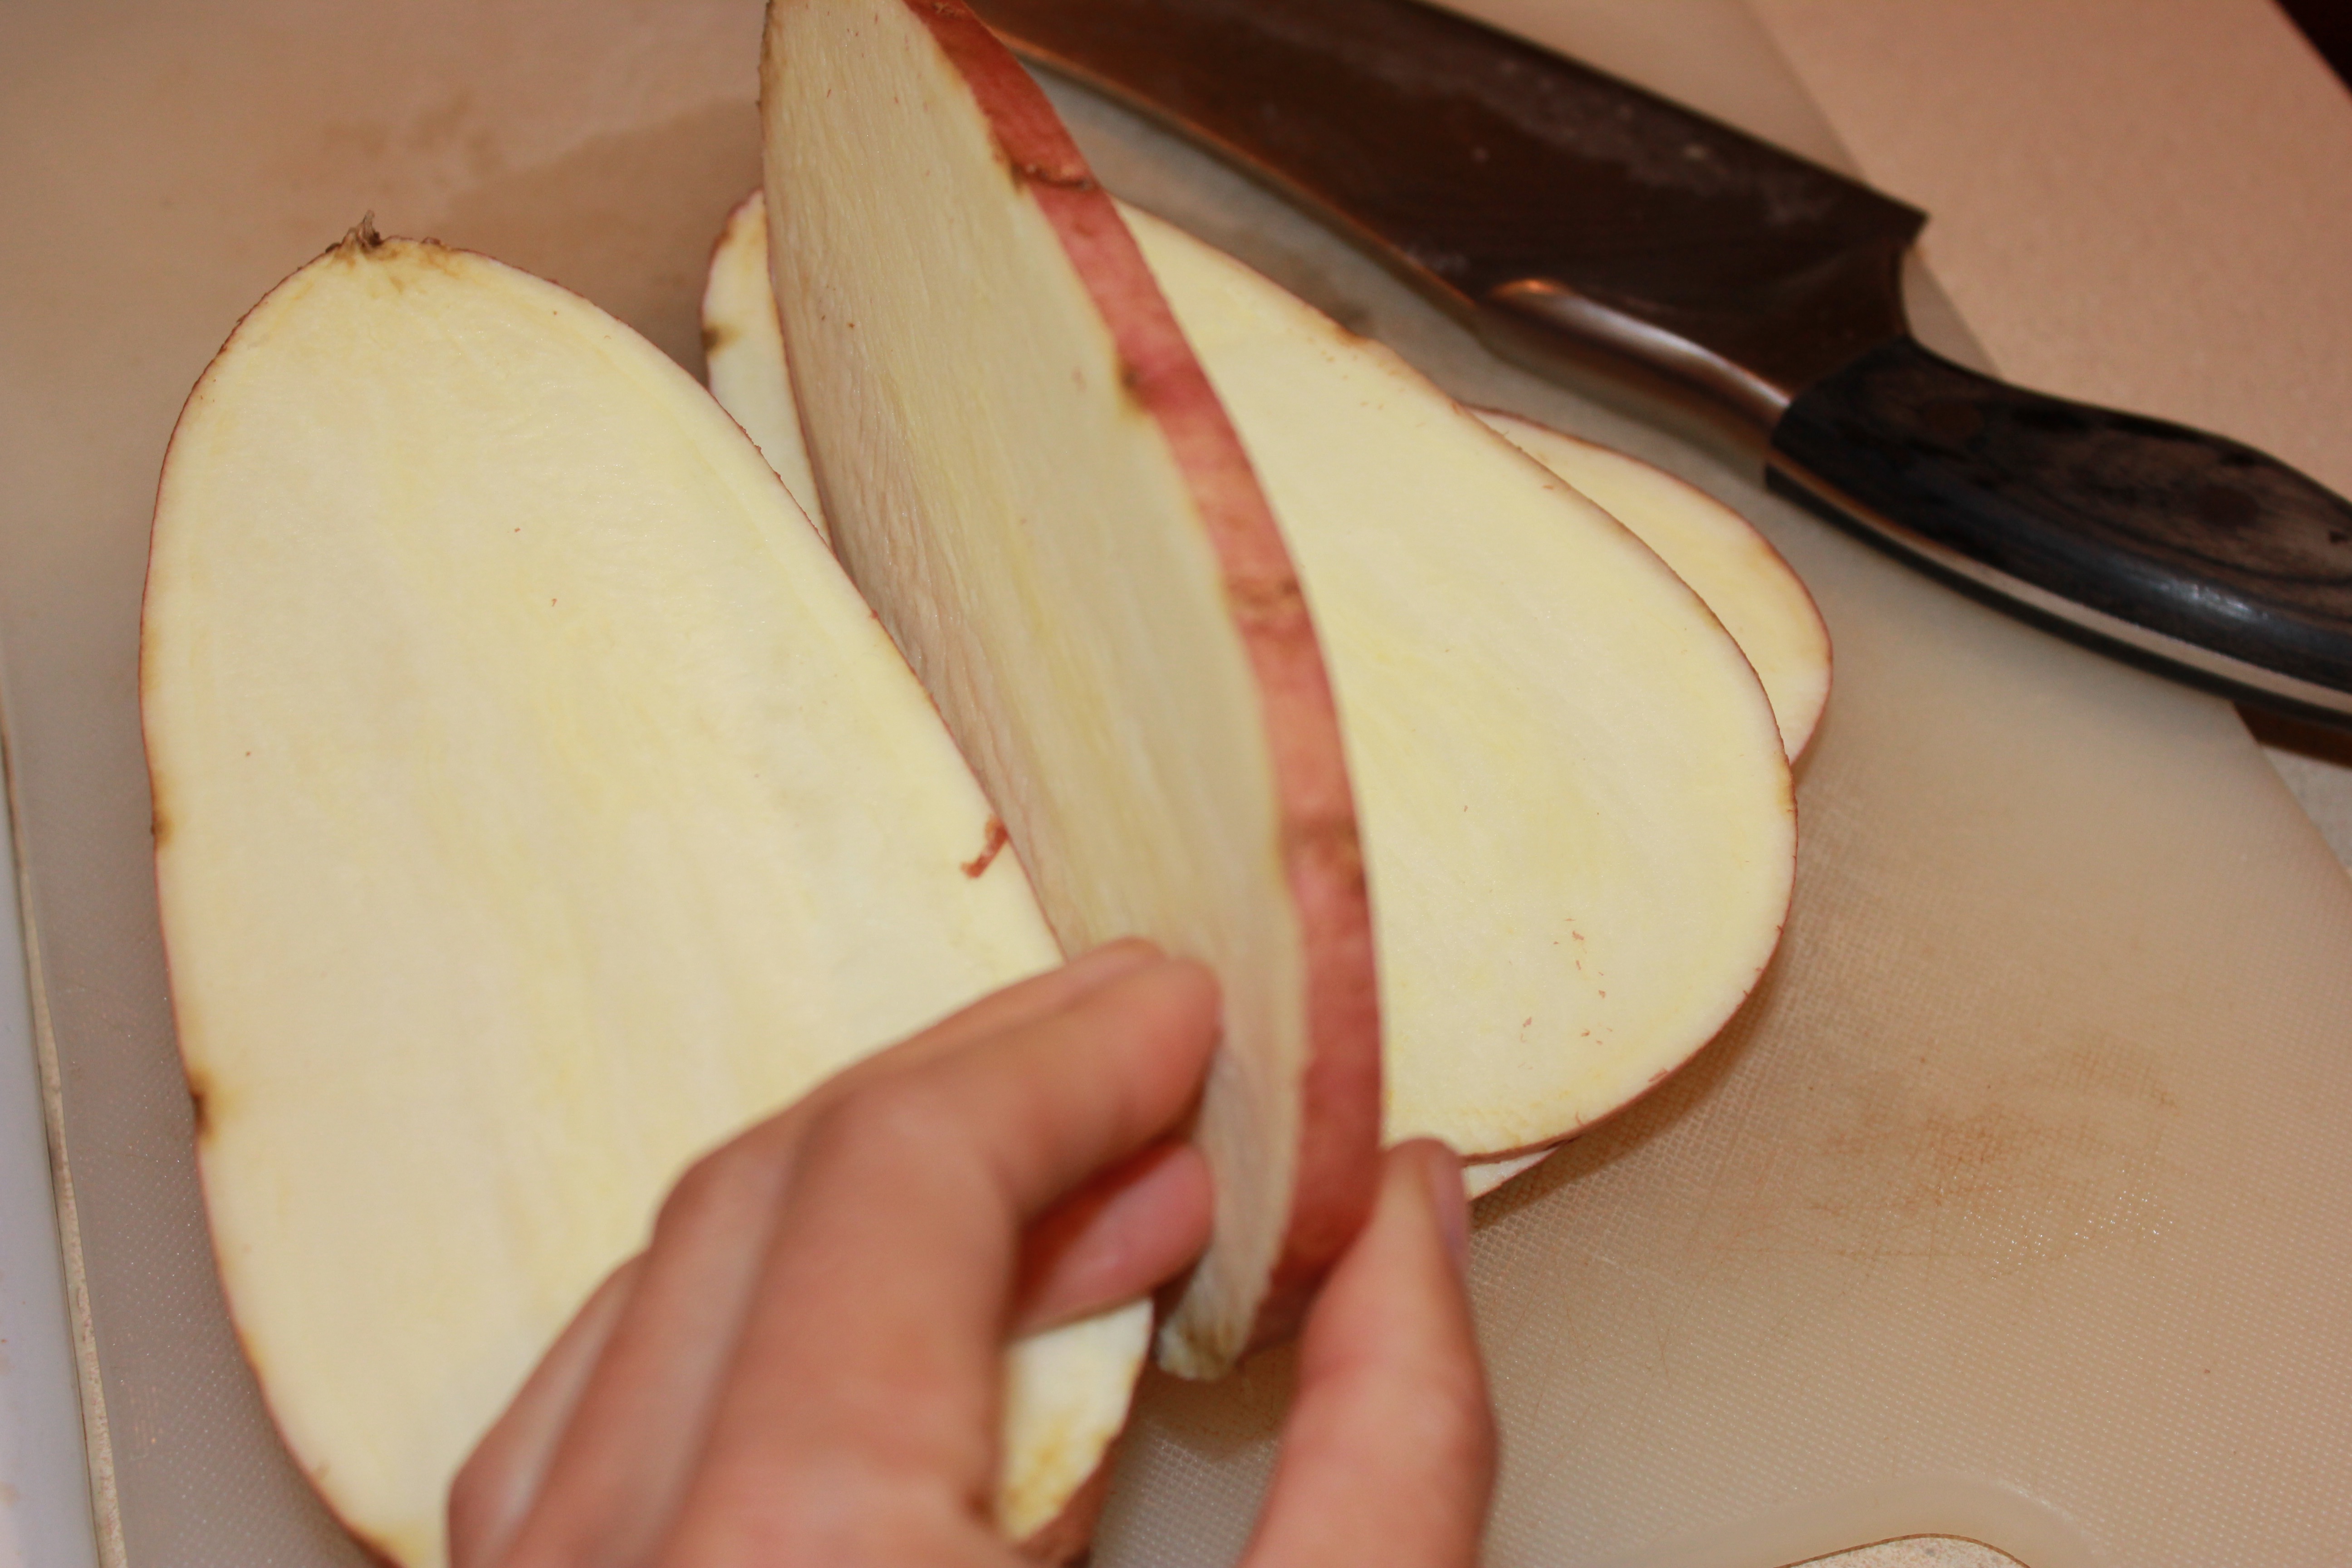 Slicing a yellow-fleshed sweet potato. I selected this one because it has larger, rounder surface to pile my ingredients